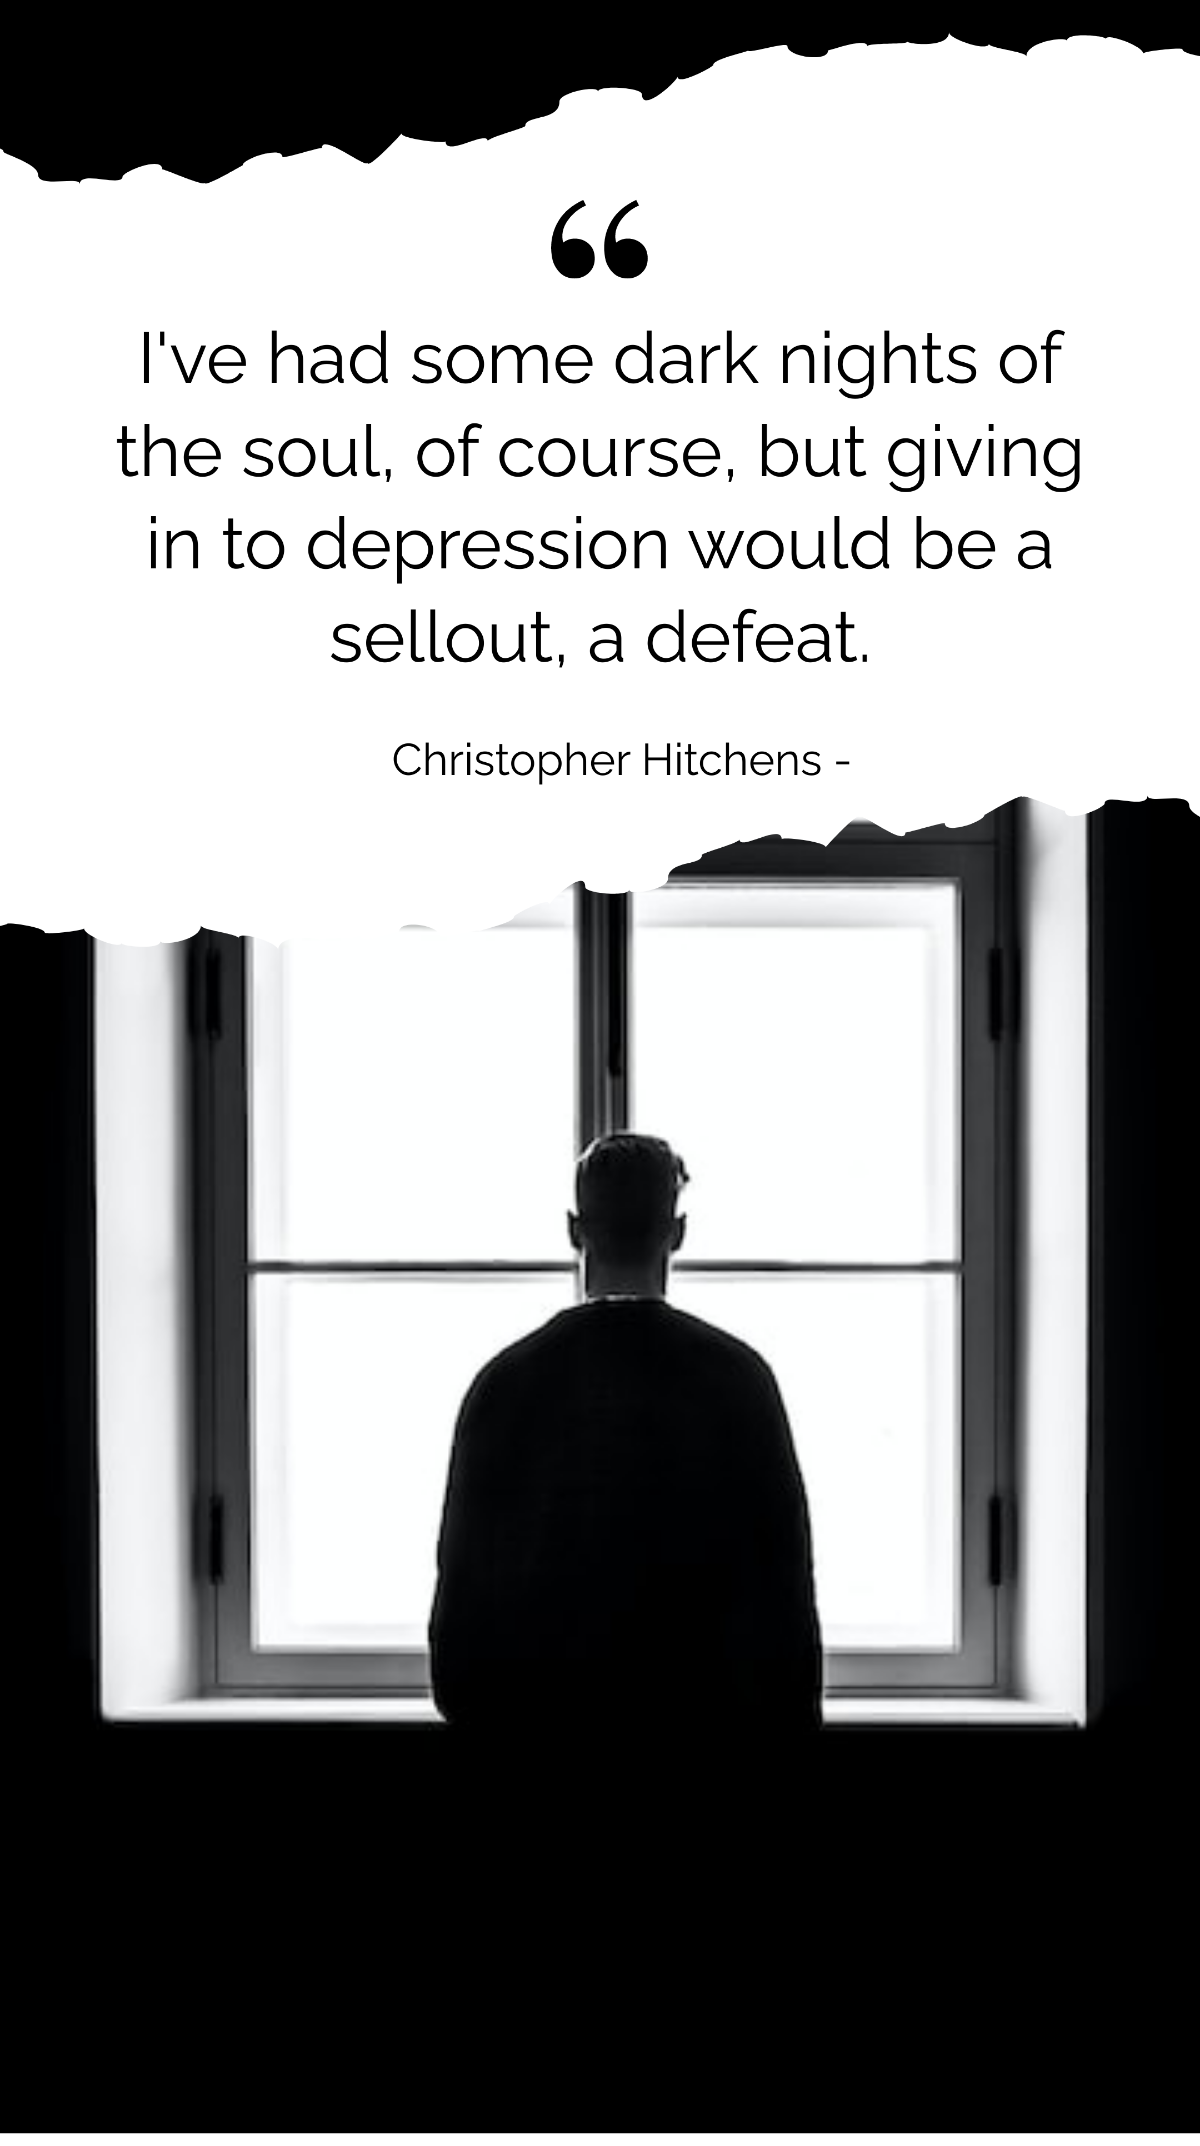 Christopher Hitchens - I've had some dark nights of the soul, of course, but giving in to depression would be a sellout, a defeat. Template